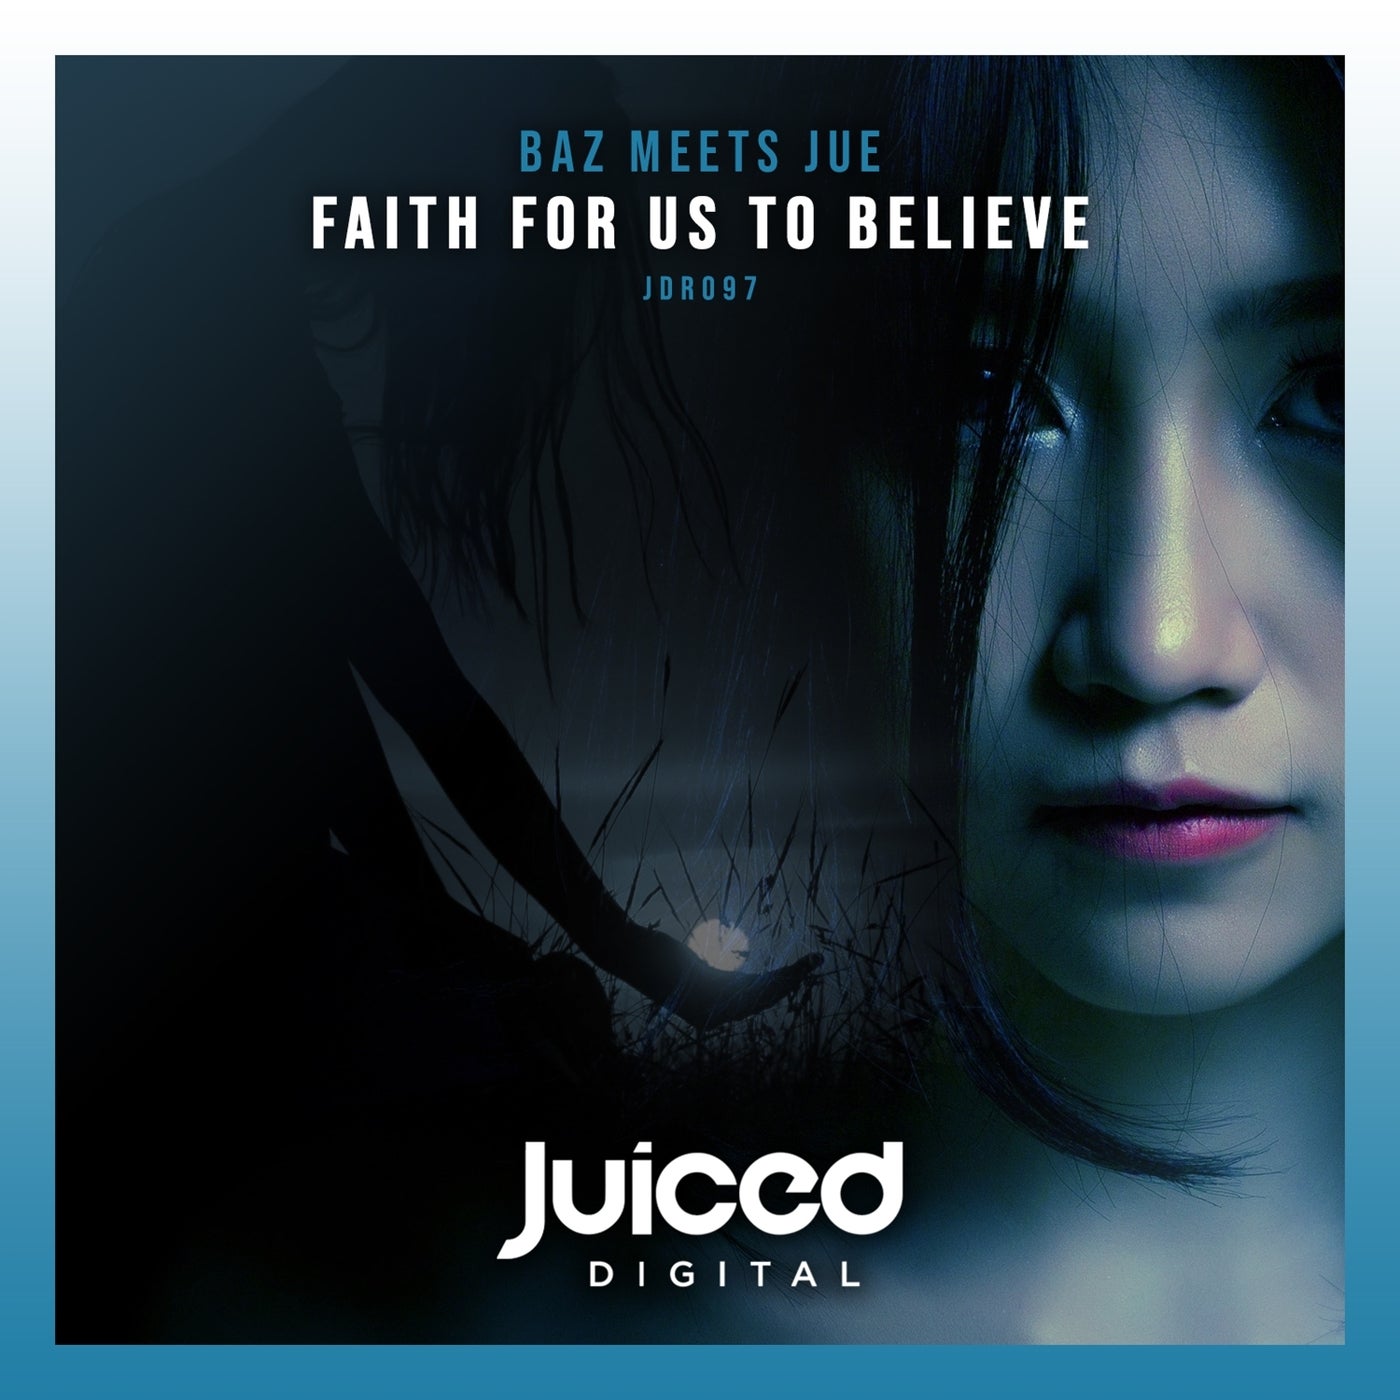 Faith for Us to Believe